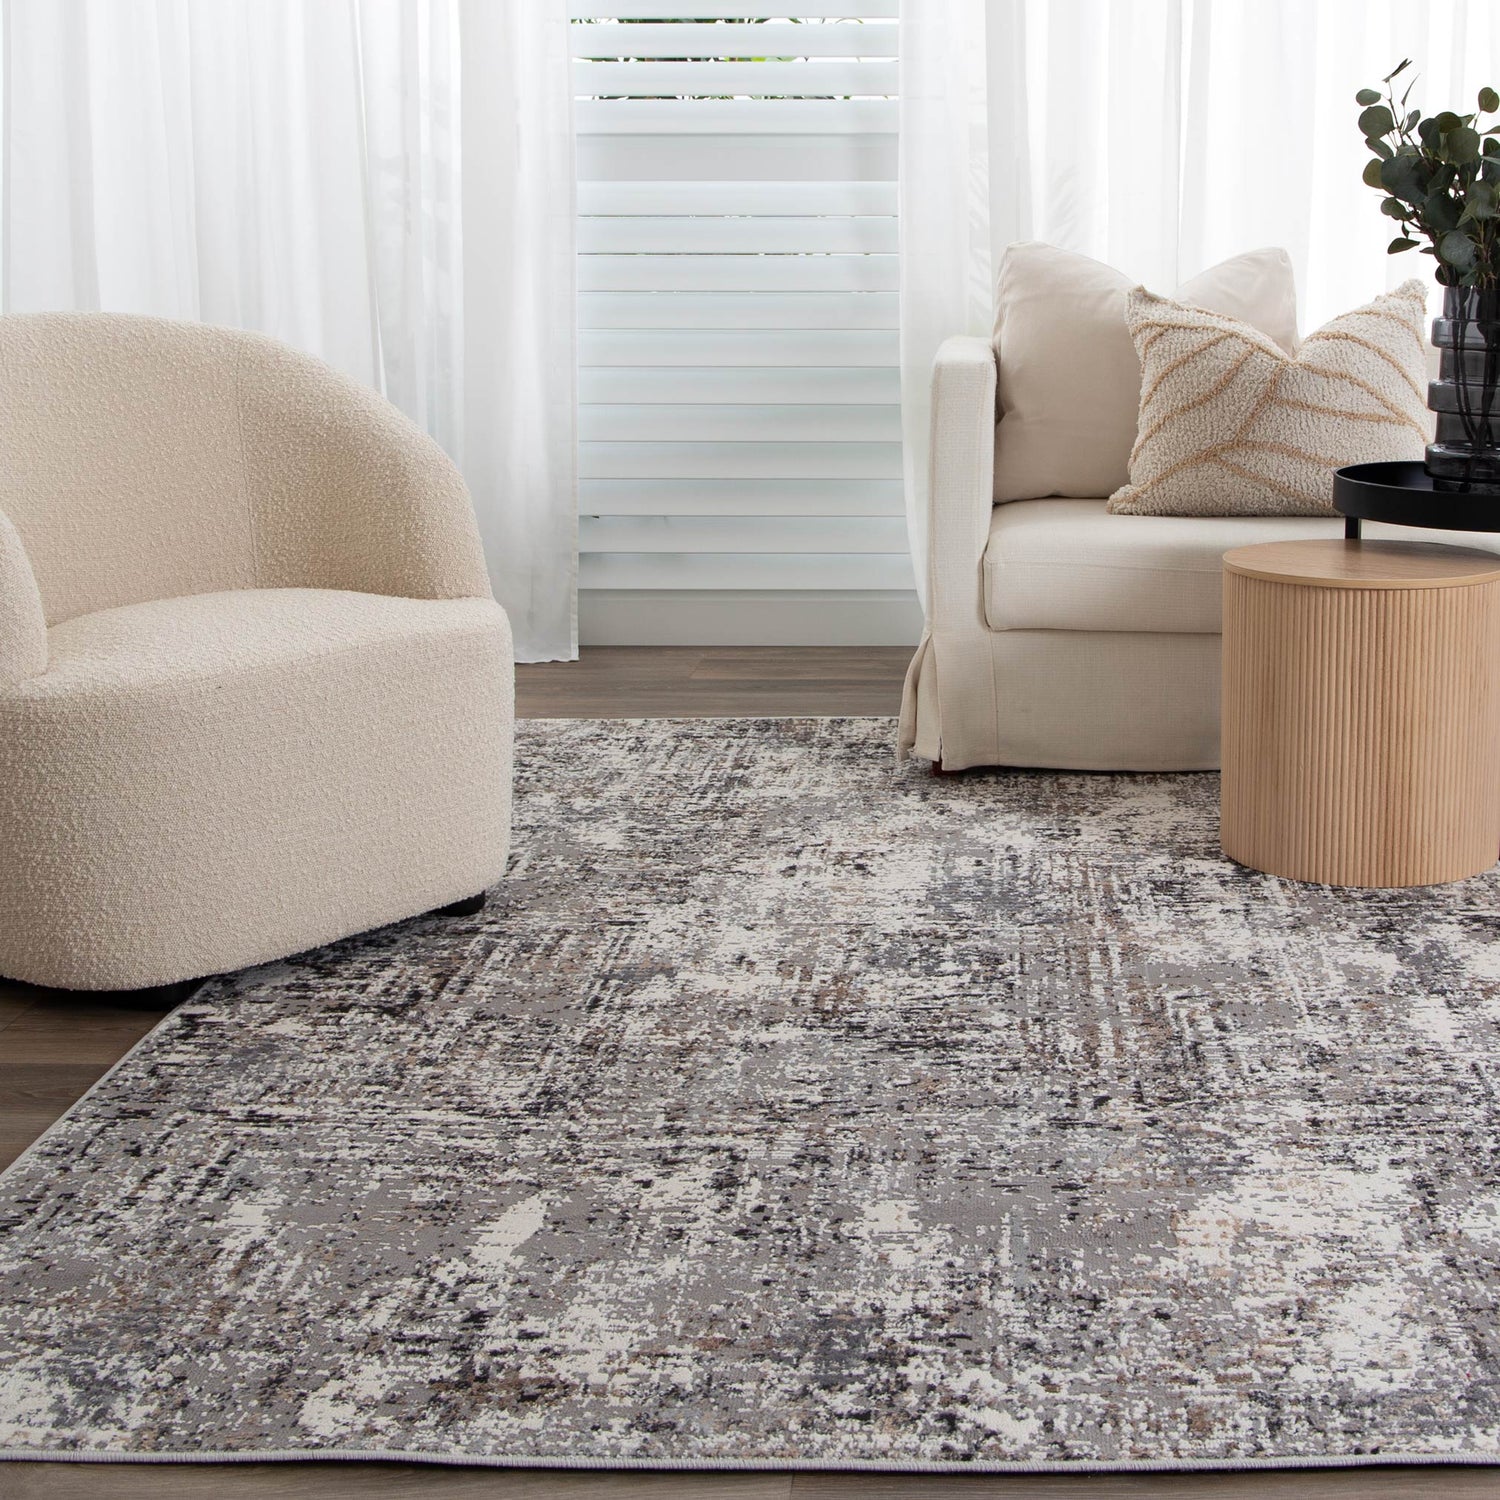 Charlotte Collection: Modern synthetic rug in a bold abstract design with pops of color.